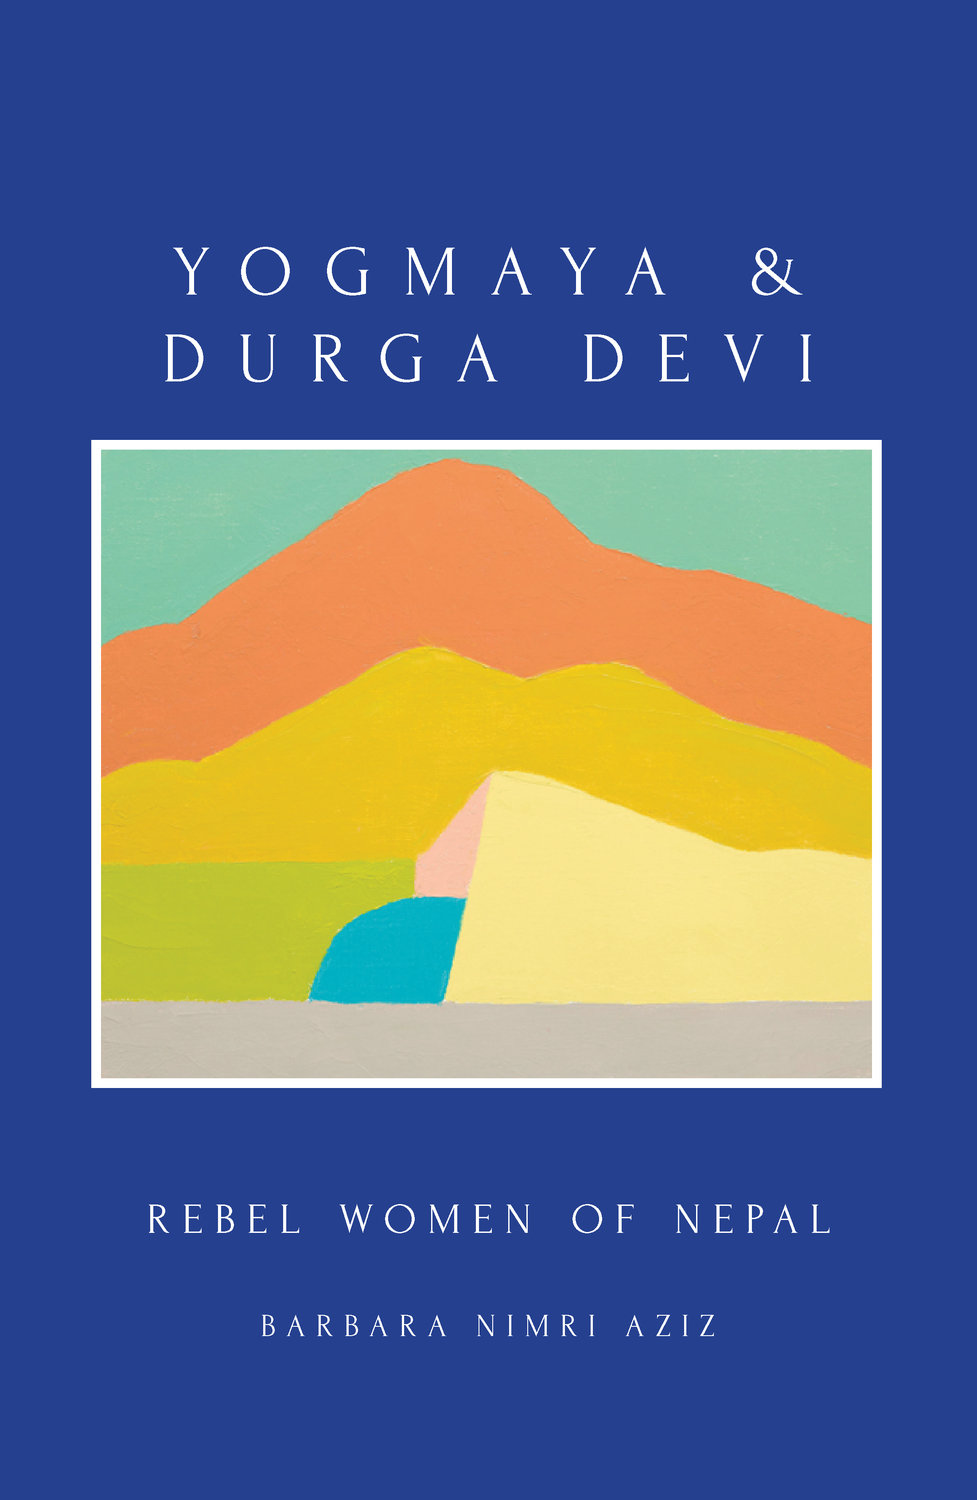 Aziz is the author of six books. Her latest, “Yogmaya & Durga Devi: Rebel Women of Nepal,” can be purchased as an eBook on Amazon.